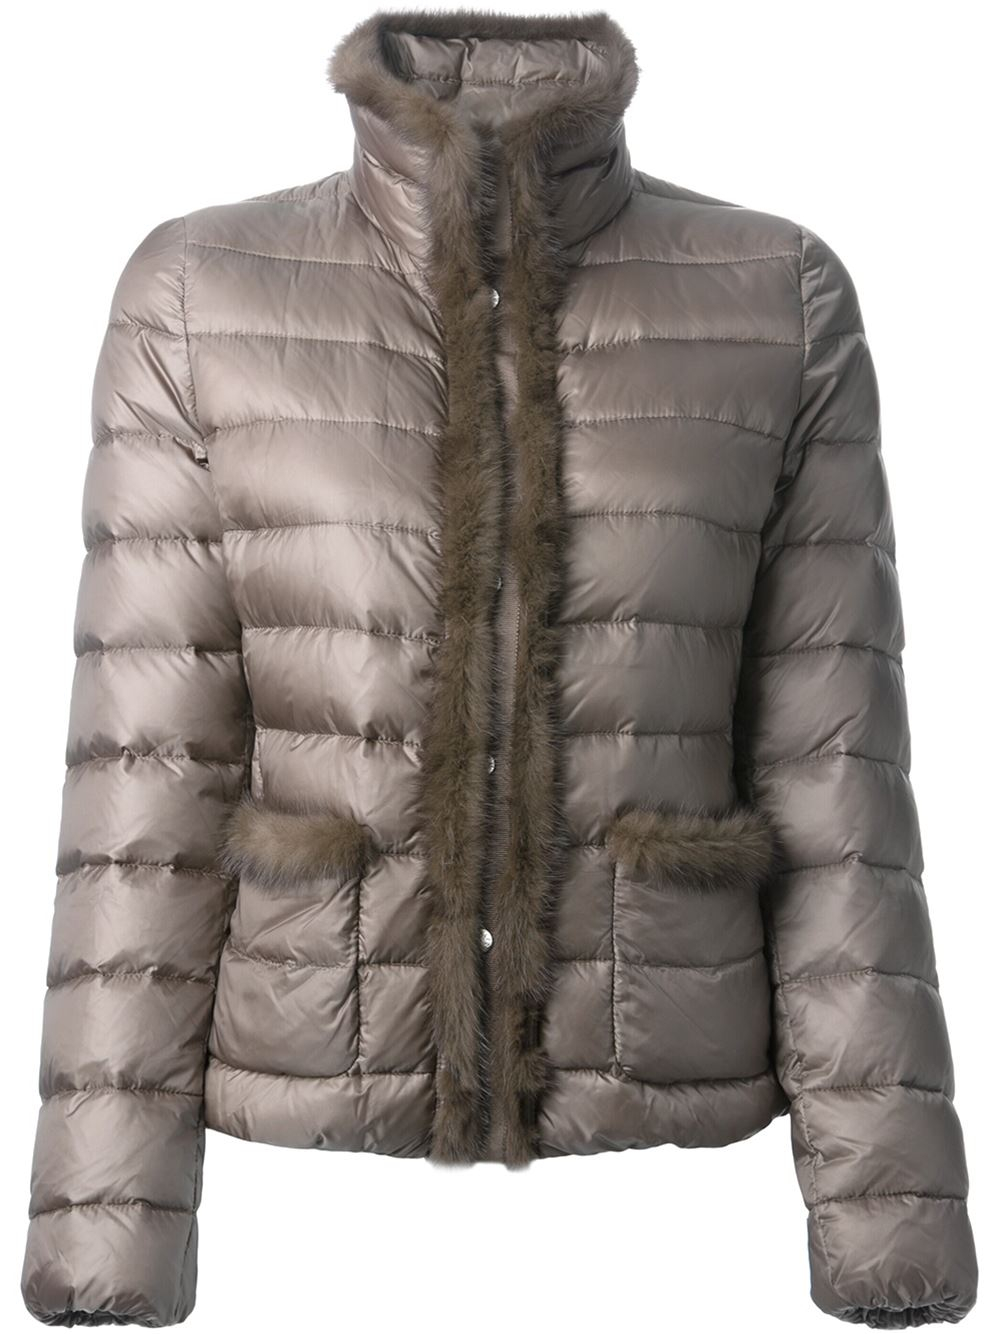 Moncler 'Temple' Padded Jacket in Brown | Lyst